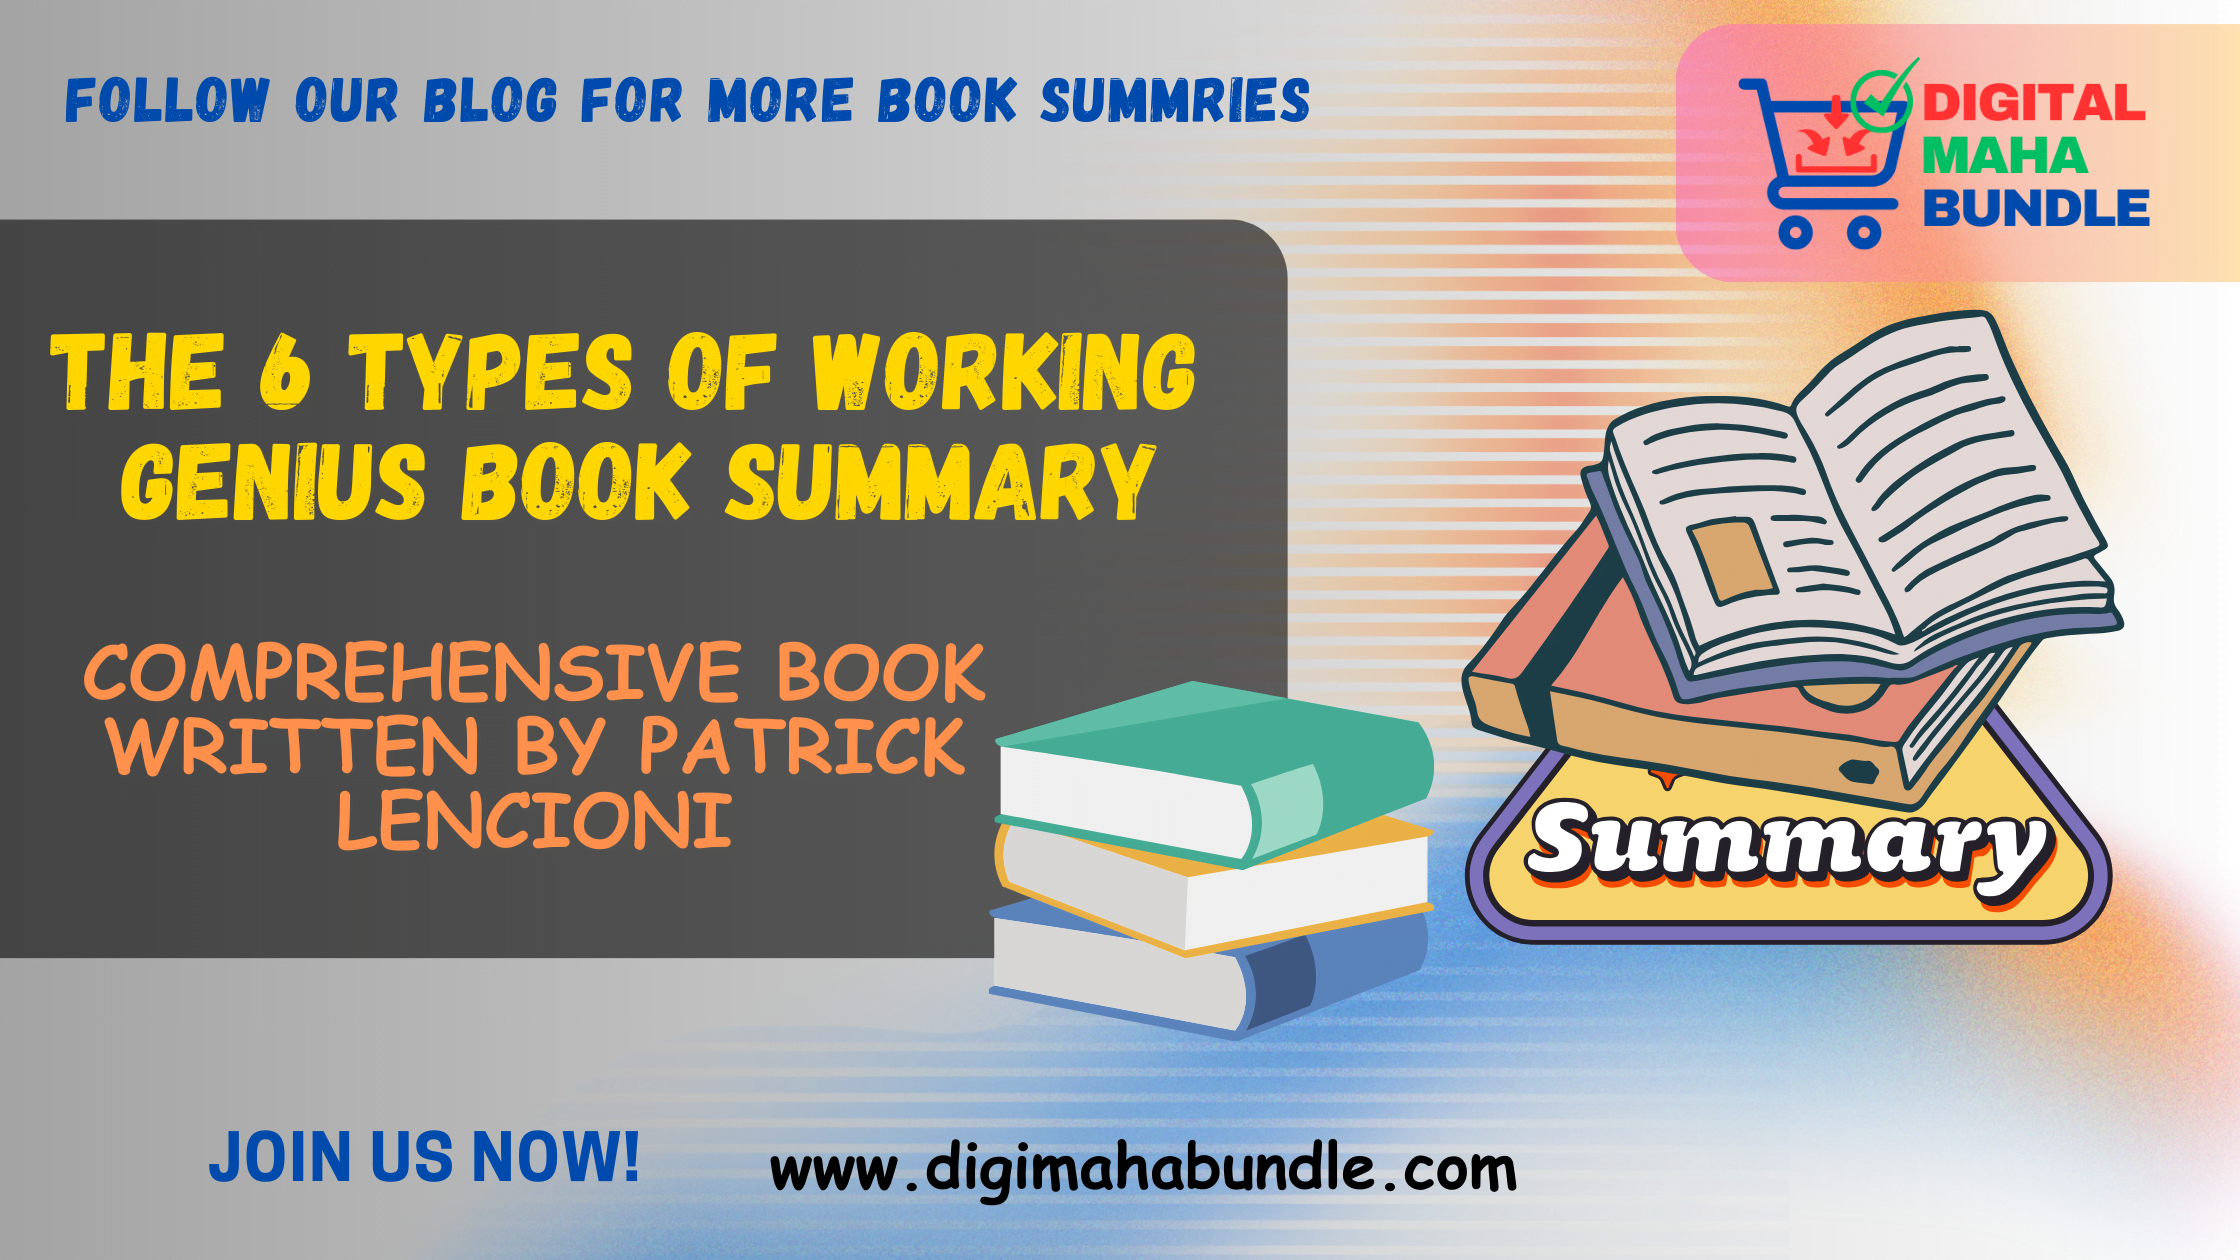 The 6 Types of Working Genius Book Summary